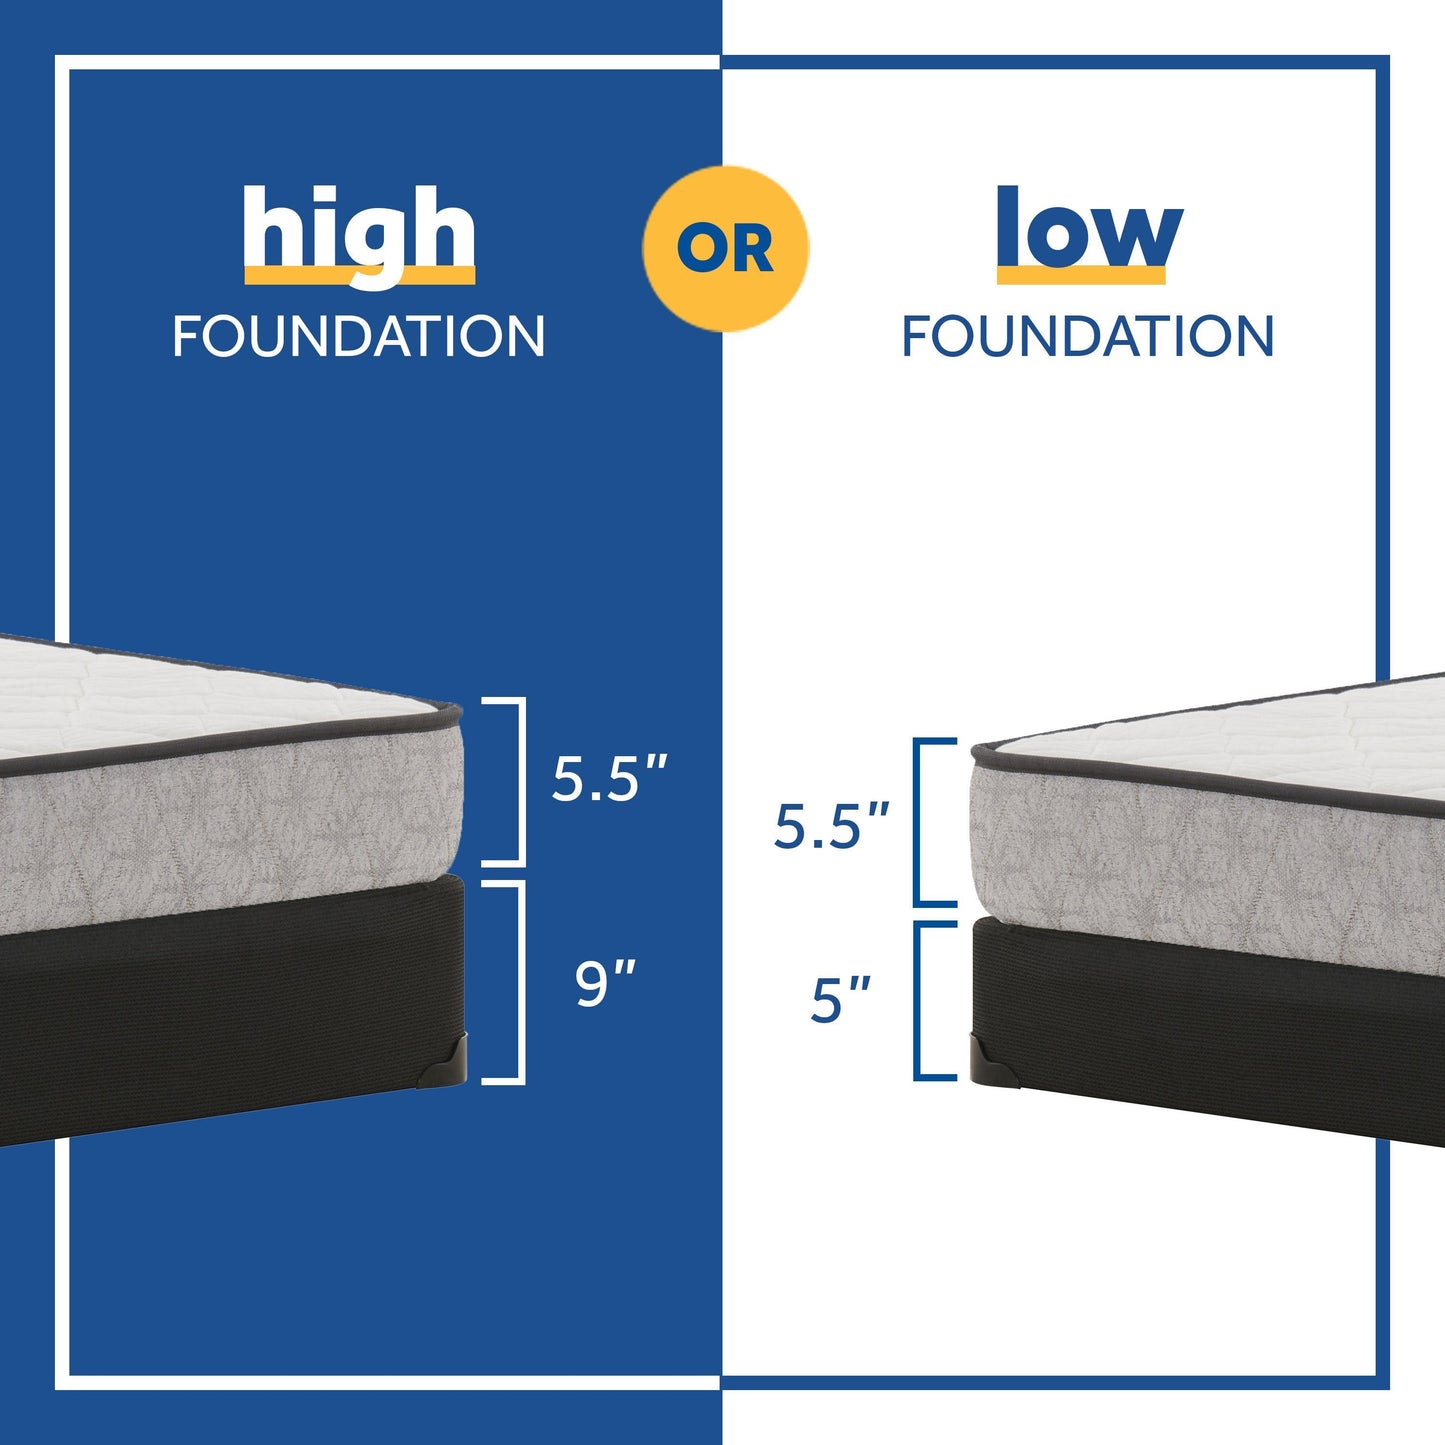 Sealy Altway Mattress Foundation Guide